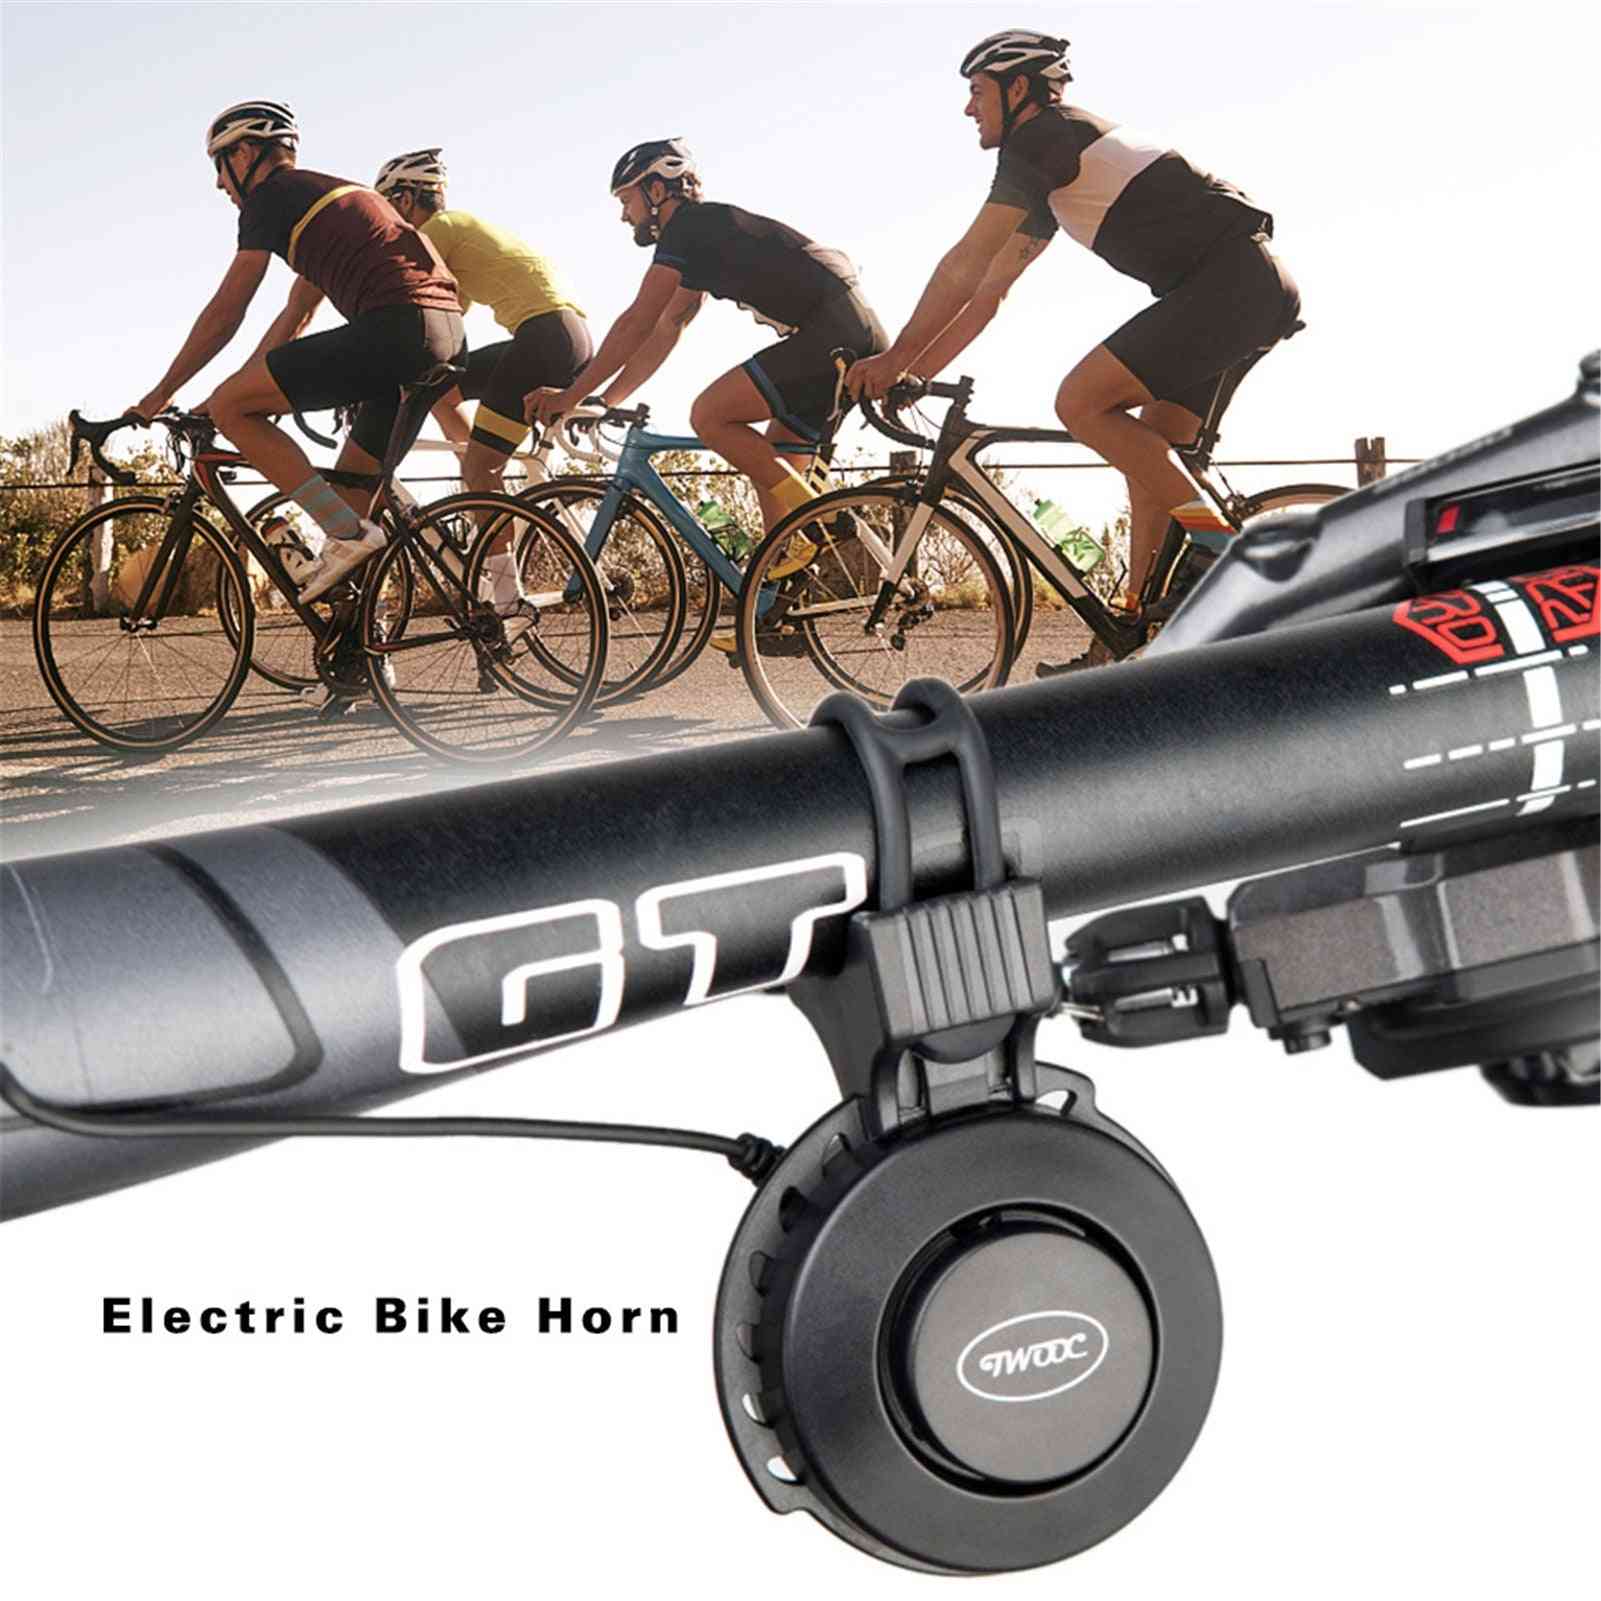 Usb Charging- Outdoor Cycling, Electric Bell Horn